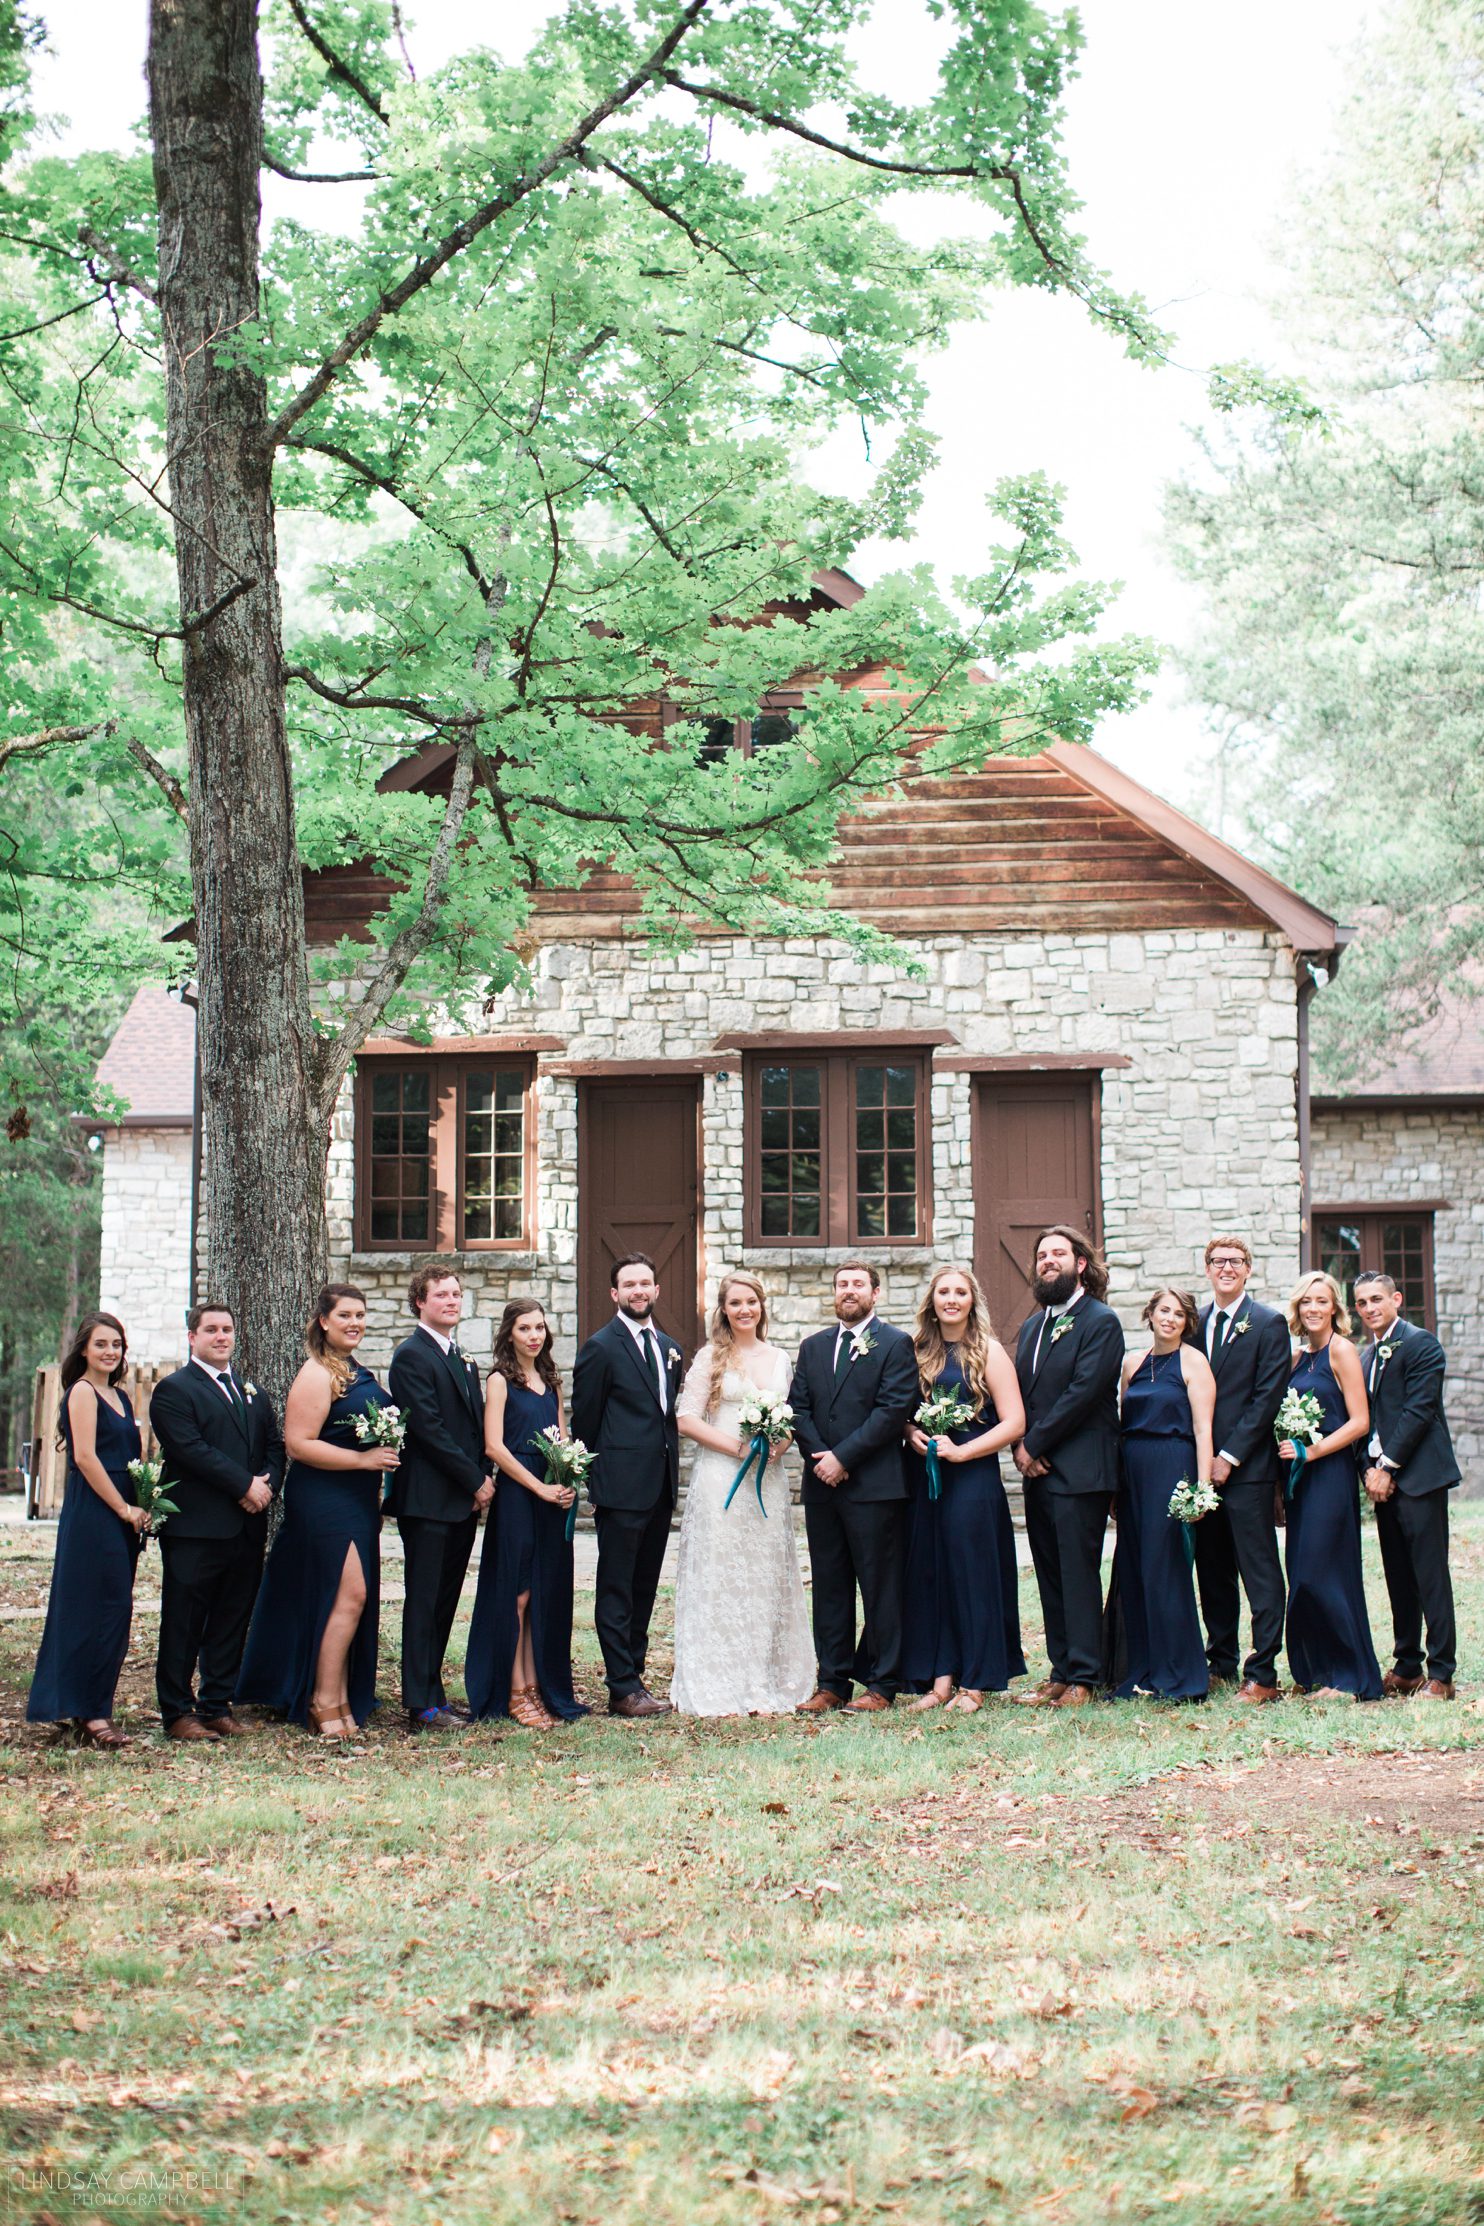 Taylor-and-Andrew-Nashville-Wooded-Wedding-Cedars-of-Lebanon-State-Park-Wedding-Photos_0111 Taylor + Andrew's Geode-Themed Lodge Wedding in the Woods